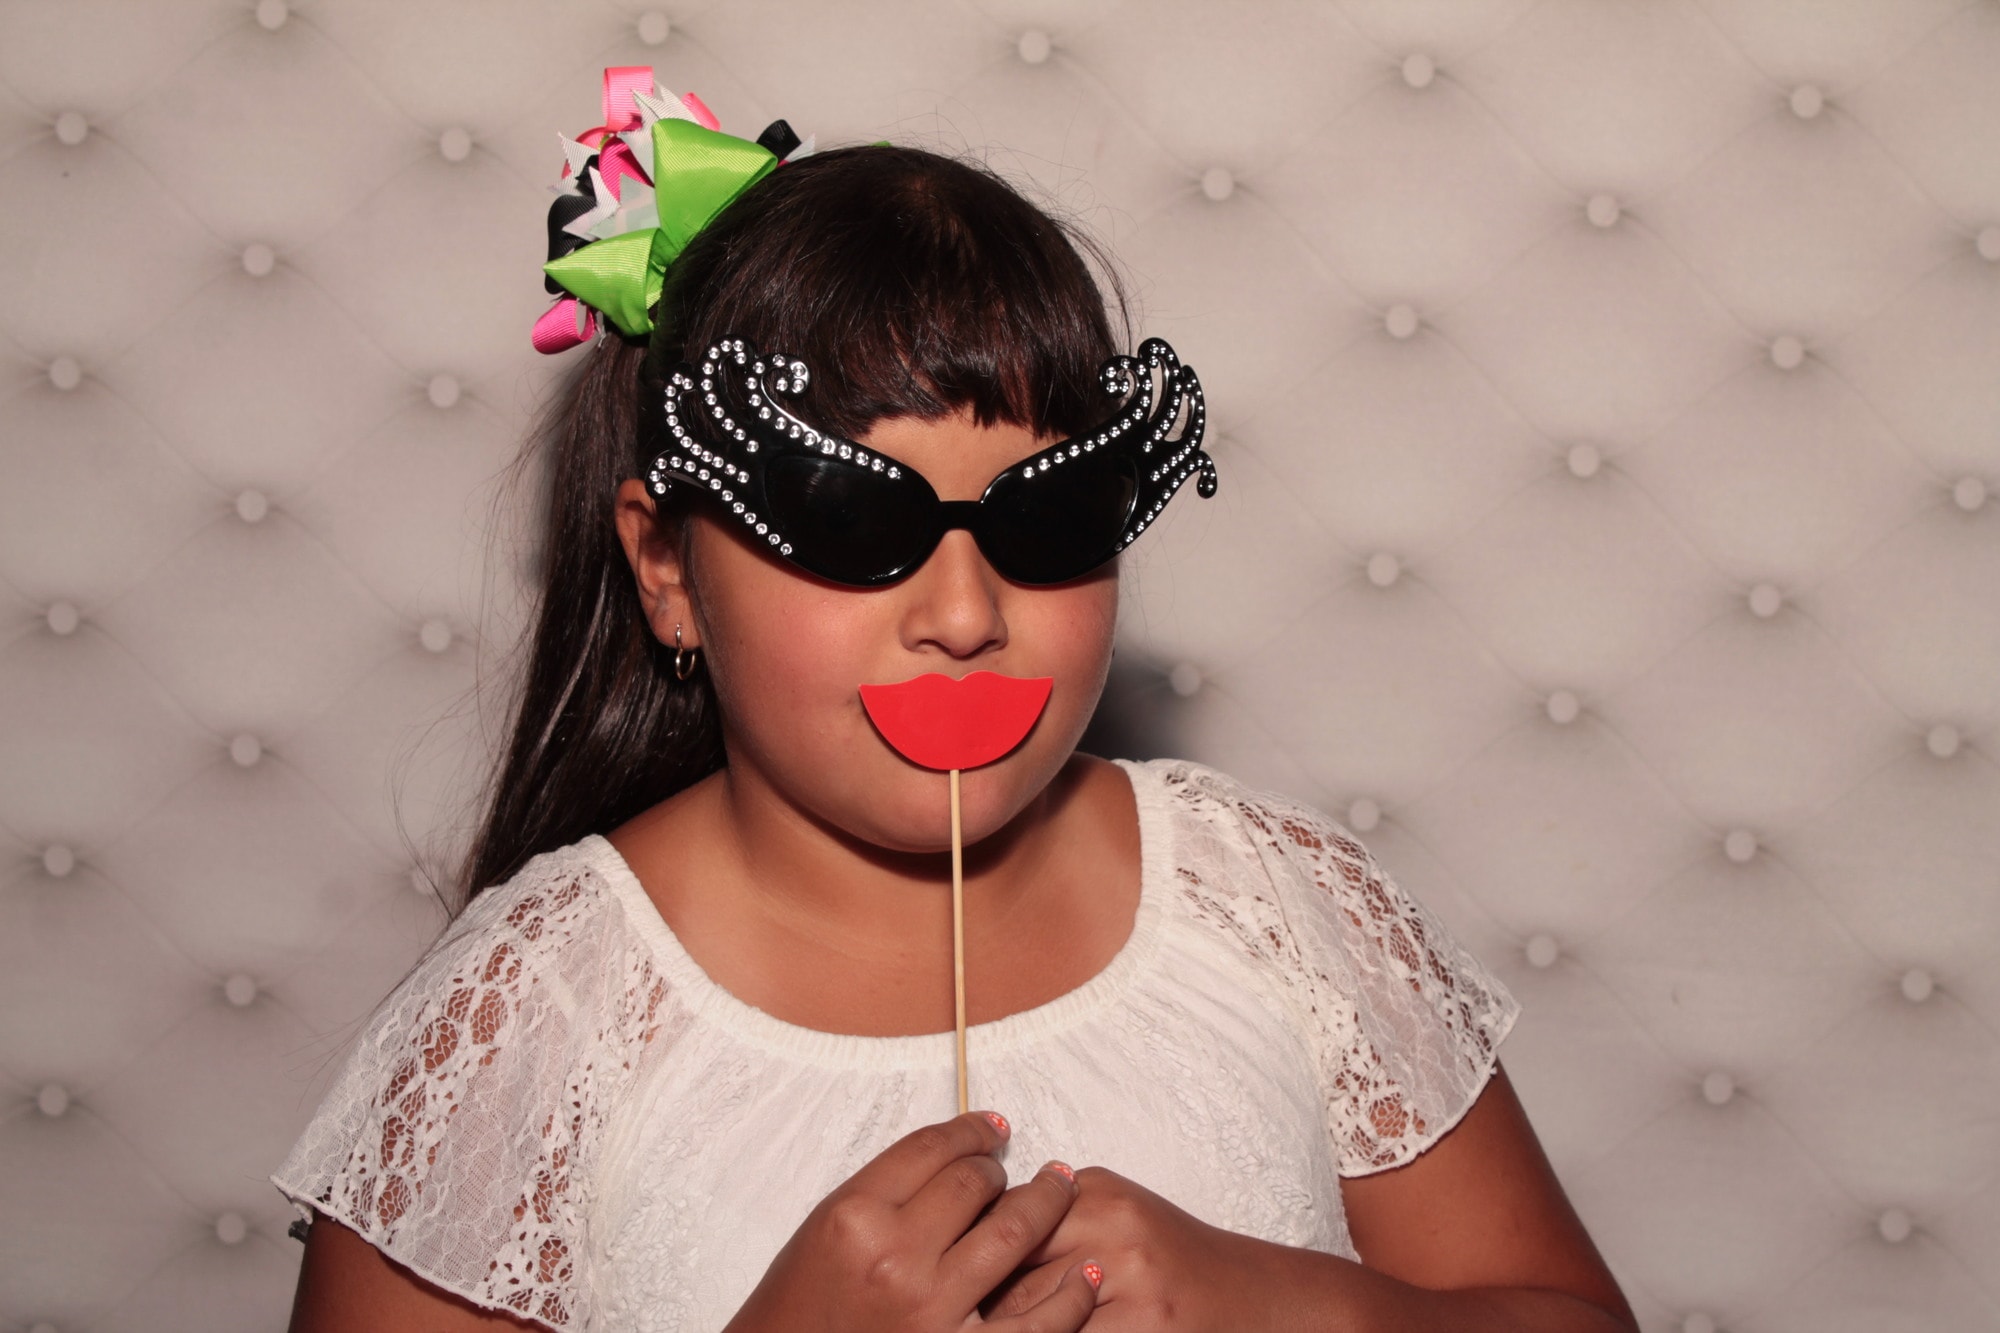 Photo-Booth-Rental-Austin-Wedding-Reception-Party-Awesome-No.1-Affordable-Social-Media-Best-LGBT-